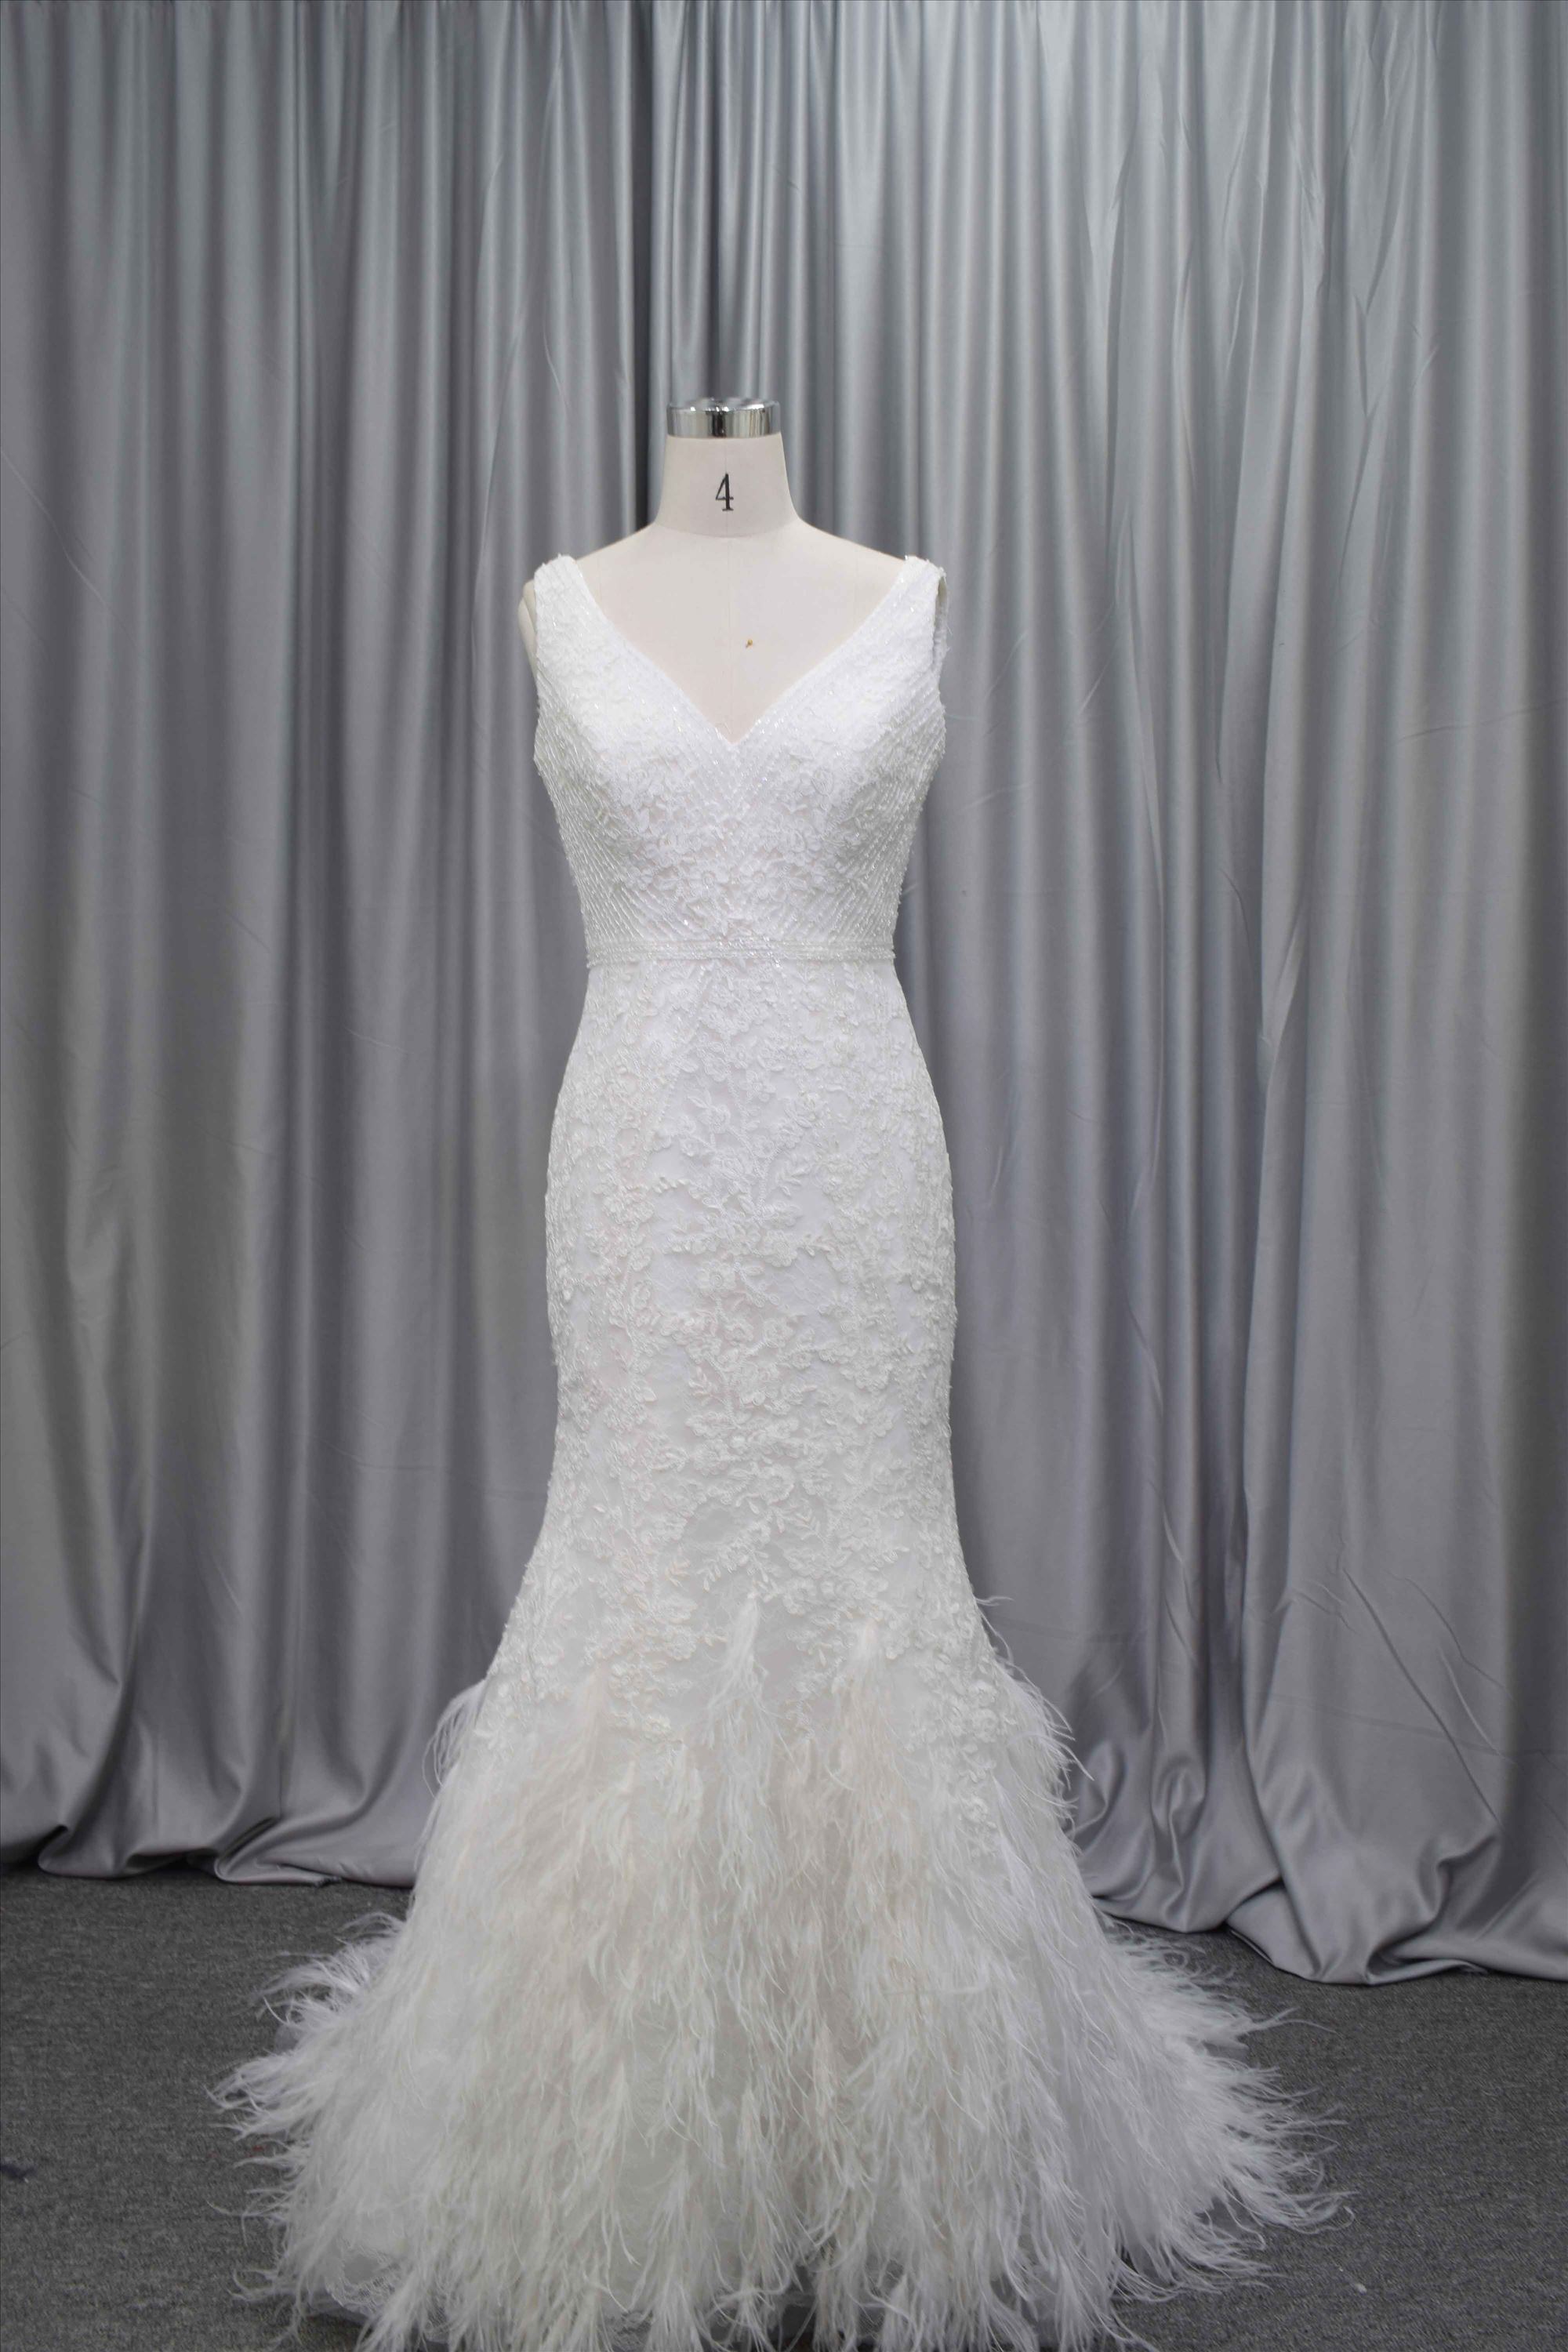 Latest design feather mermaid wedding dress hot sell bridal gown